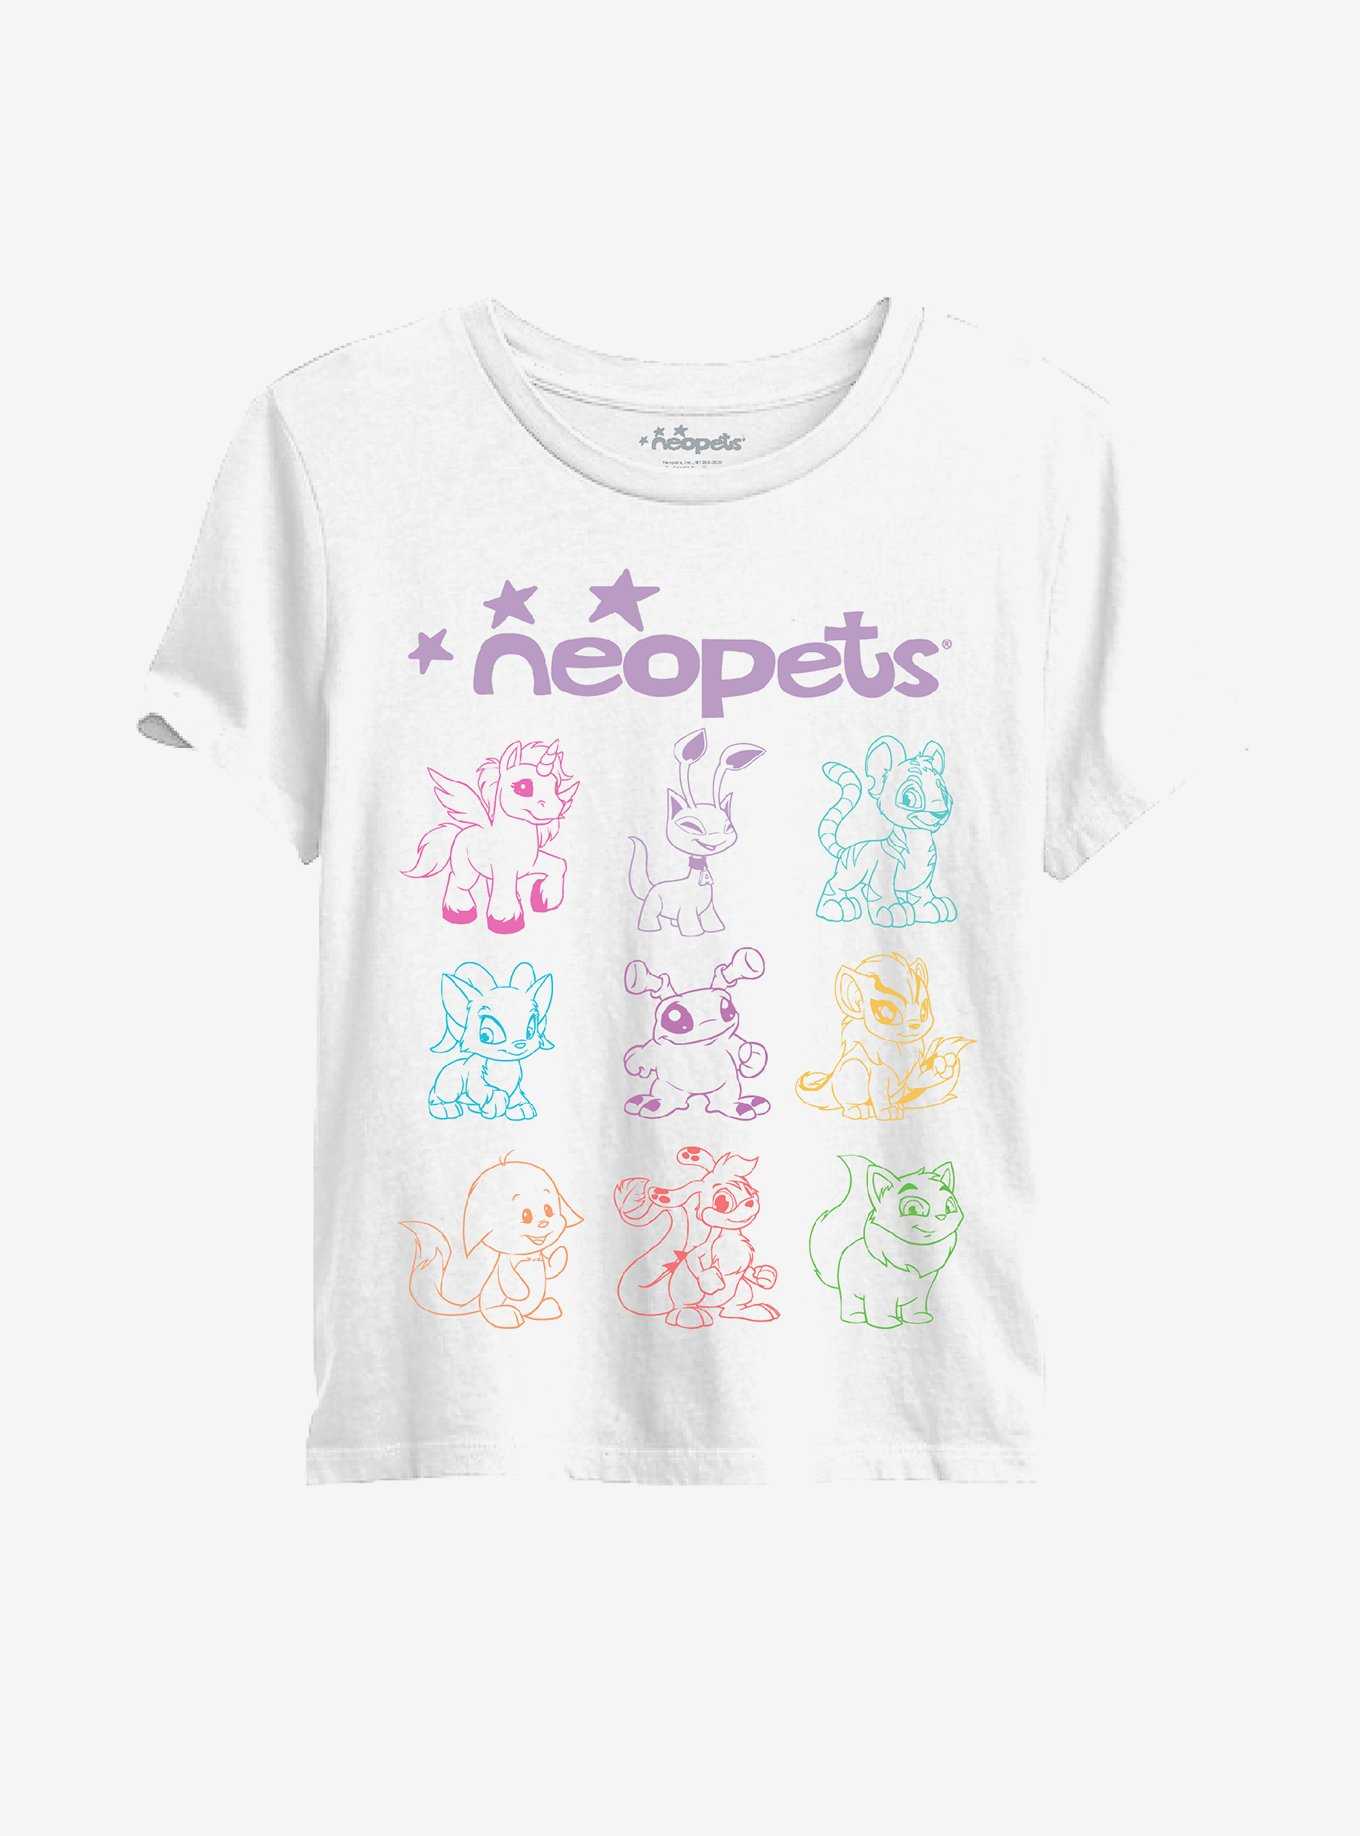 Neopets Outline Girls Baby T-Shirt, , hi-res